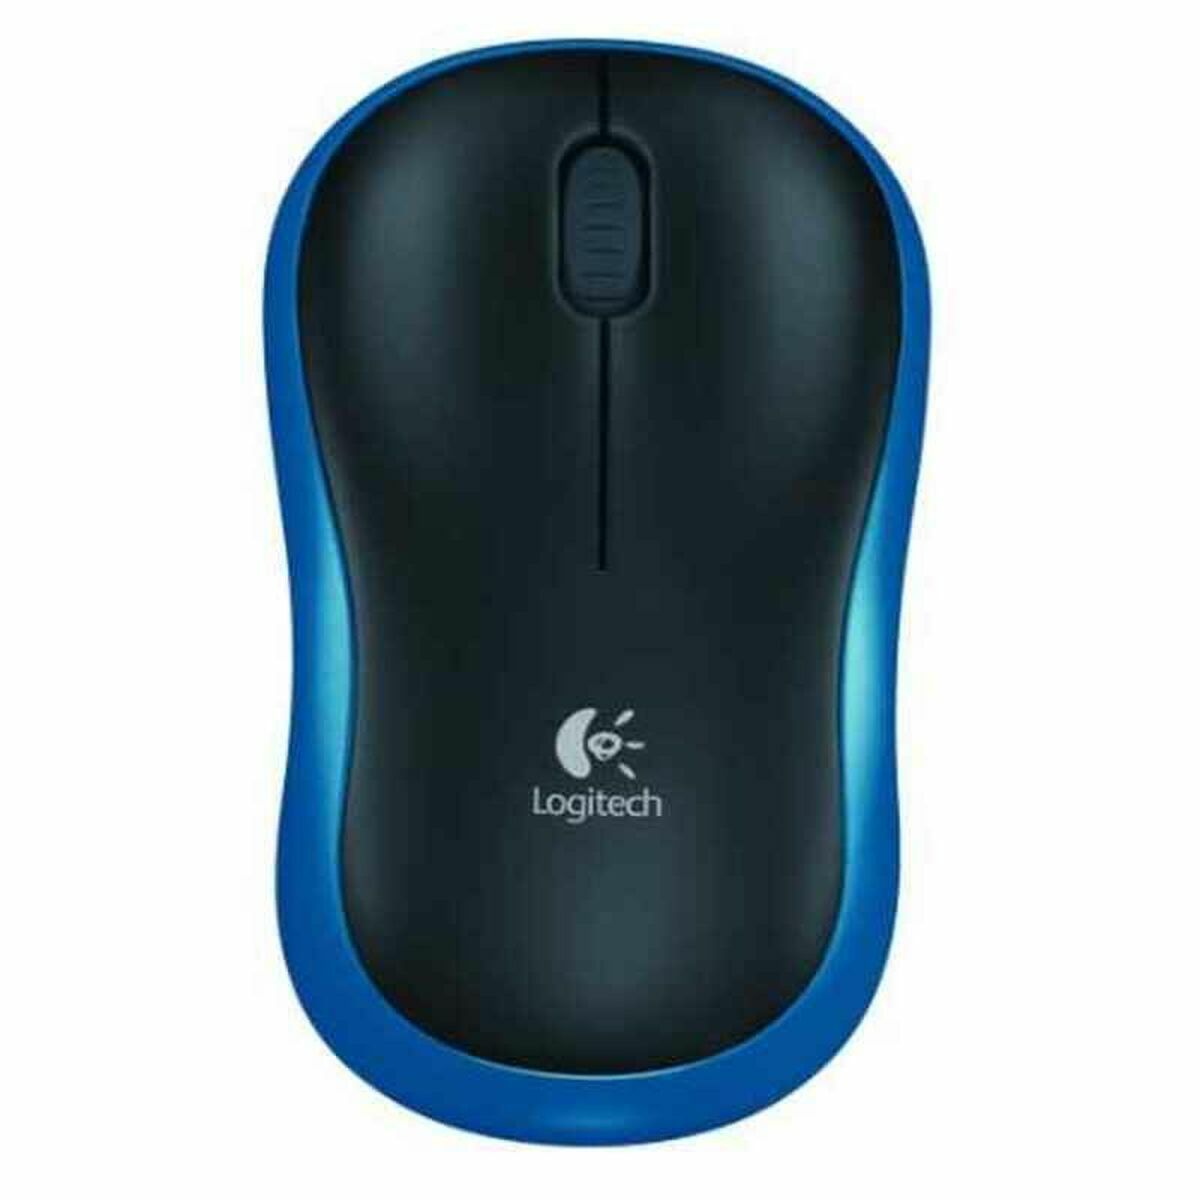 Mouse Logitech LGT-M185B Blue, Logitech, Computing, Accessories, mouse-logitech-lgt-m185b-blue, Brand_Logitech, category-reference-2609, category-reference-2642, category-reference-2656, category-reference-t-19685, category-reference-t-19908, category-reference-t-21353, category-reference-t-25626, computers / peripherals, Condition_NEW, office, Price_20 - 50, Teleworking, RiotNook